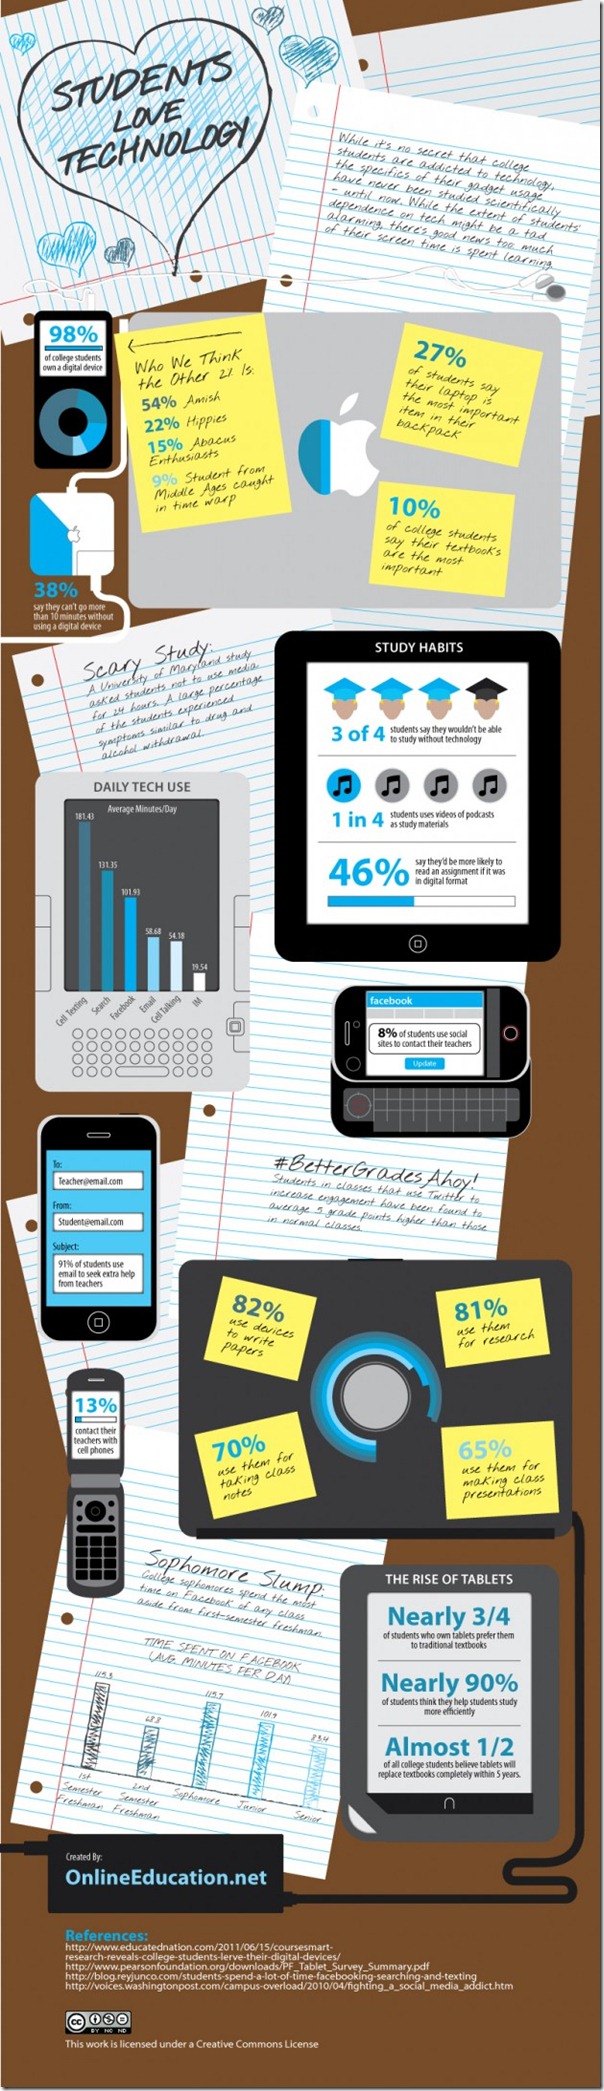 students love tech e1312910234195 thumb Students Love Technology [infographic]